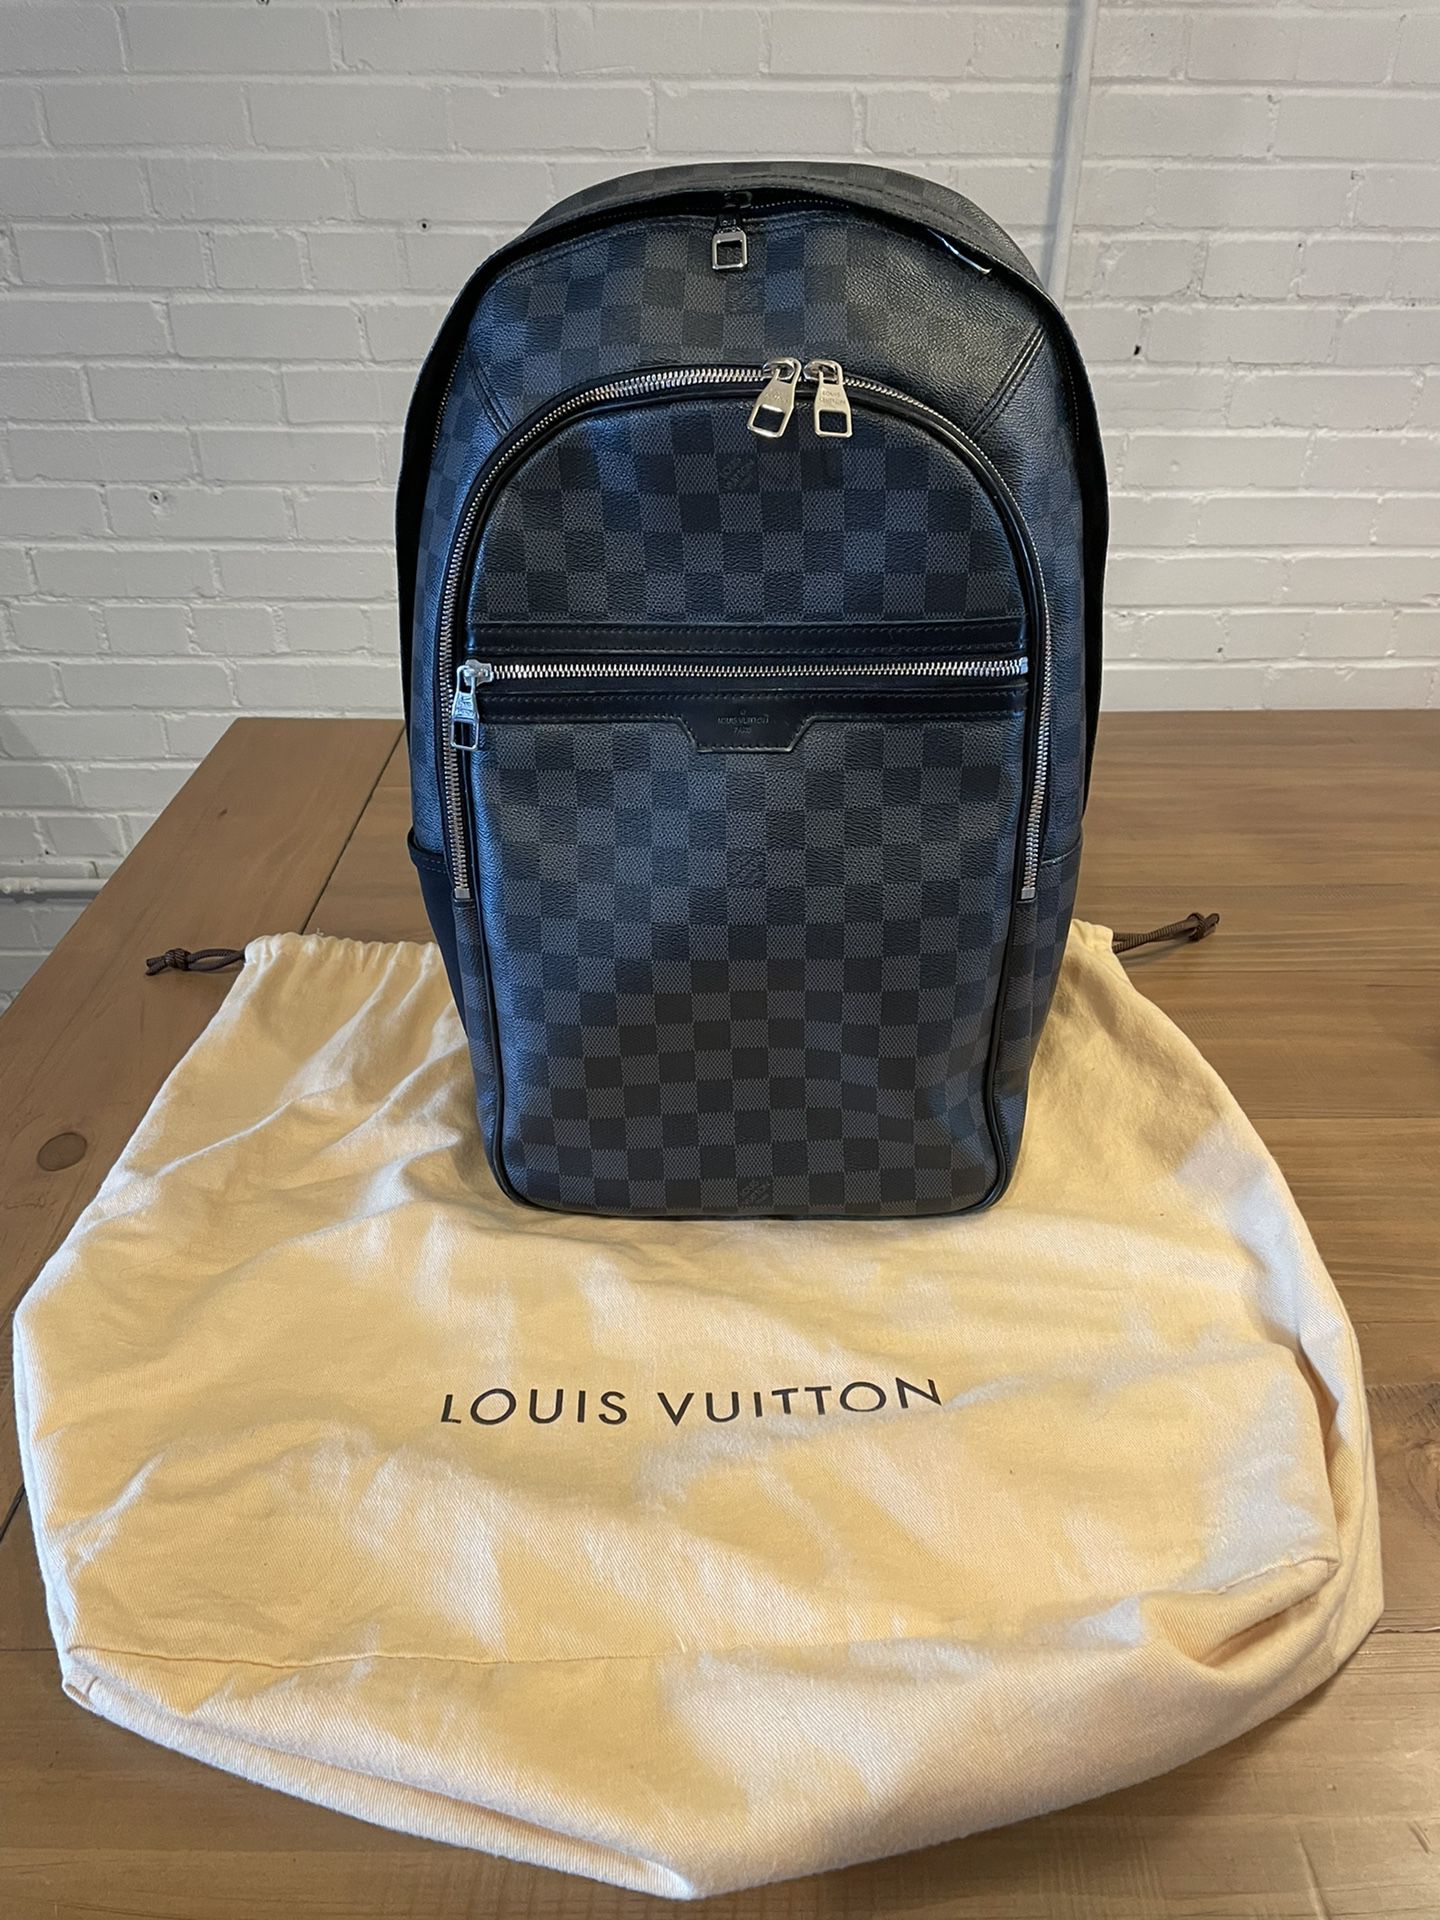 Louis Vuitton Backpack - Michael Damier Leather for Sale in